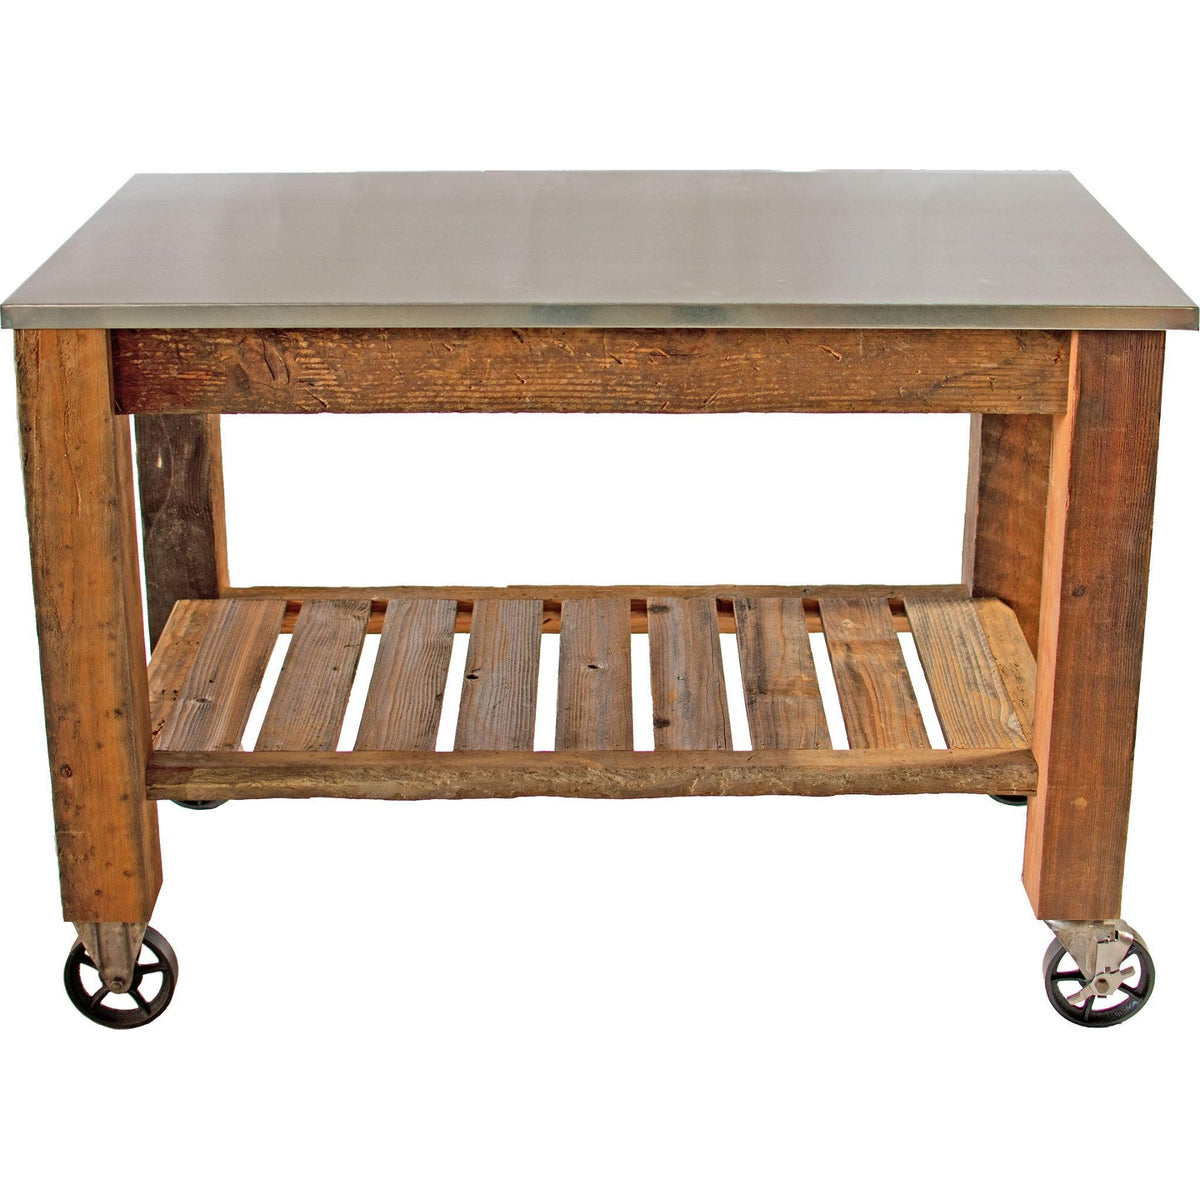 Top of Lee Display's Redwood Potting Table Rolling Cart with 6in Vintage Casters without Hardware Included on sale now at leedisplay.com